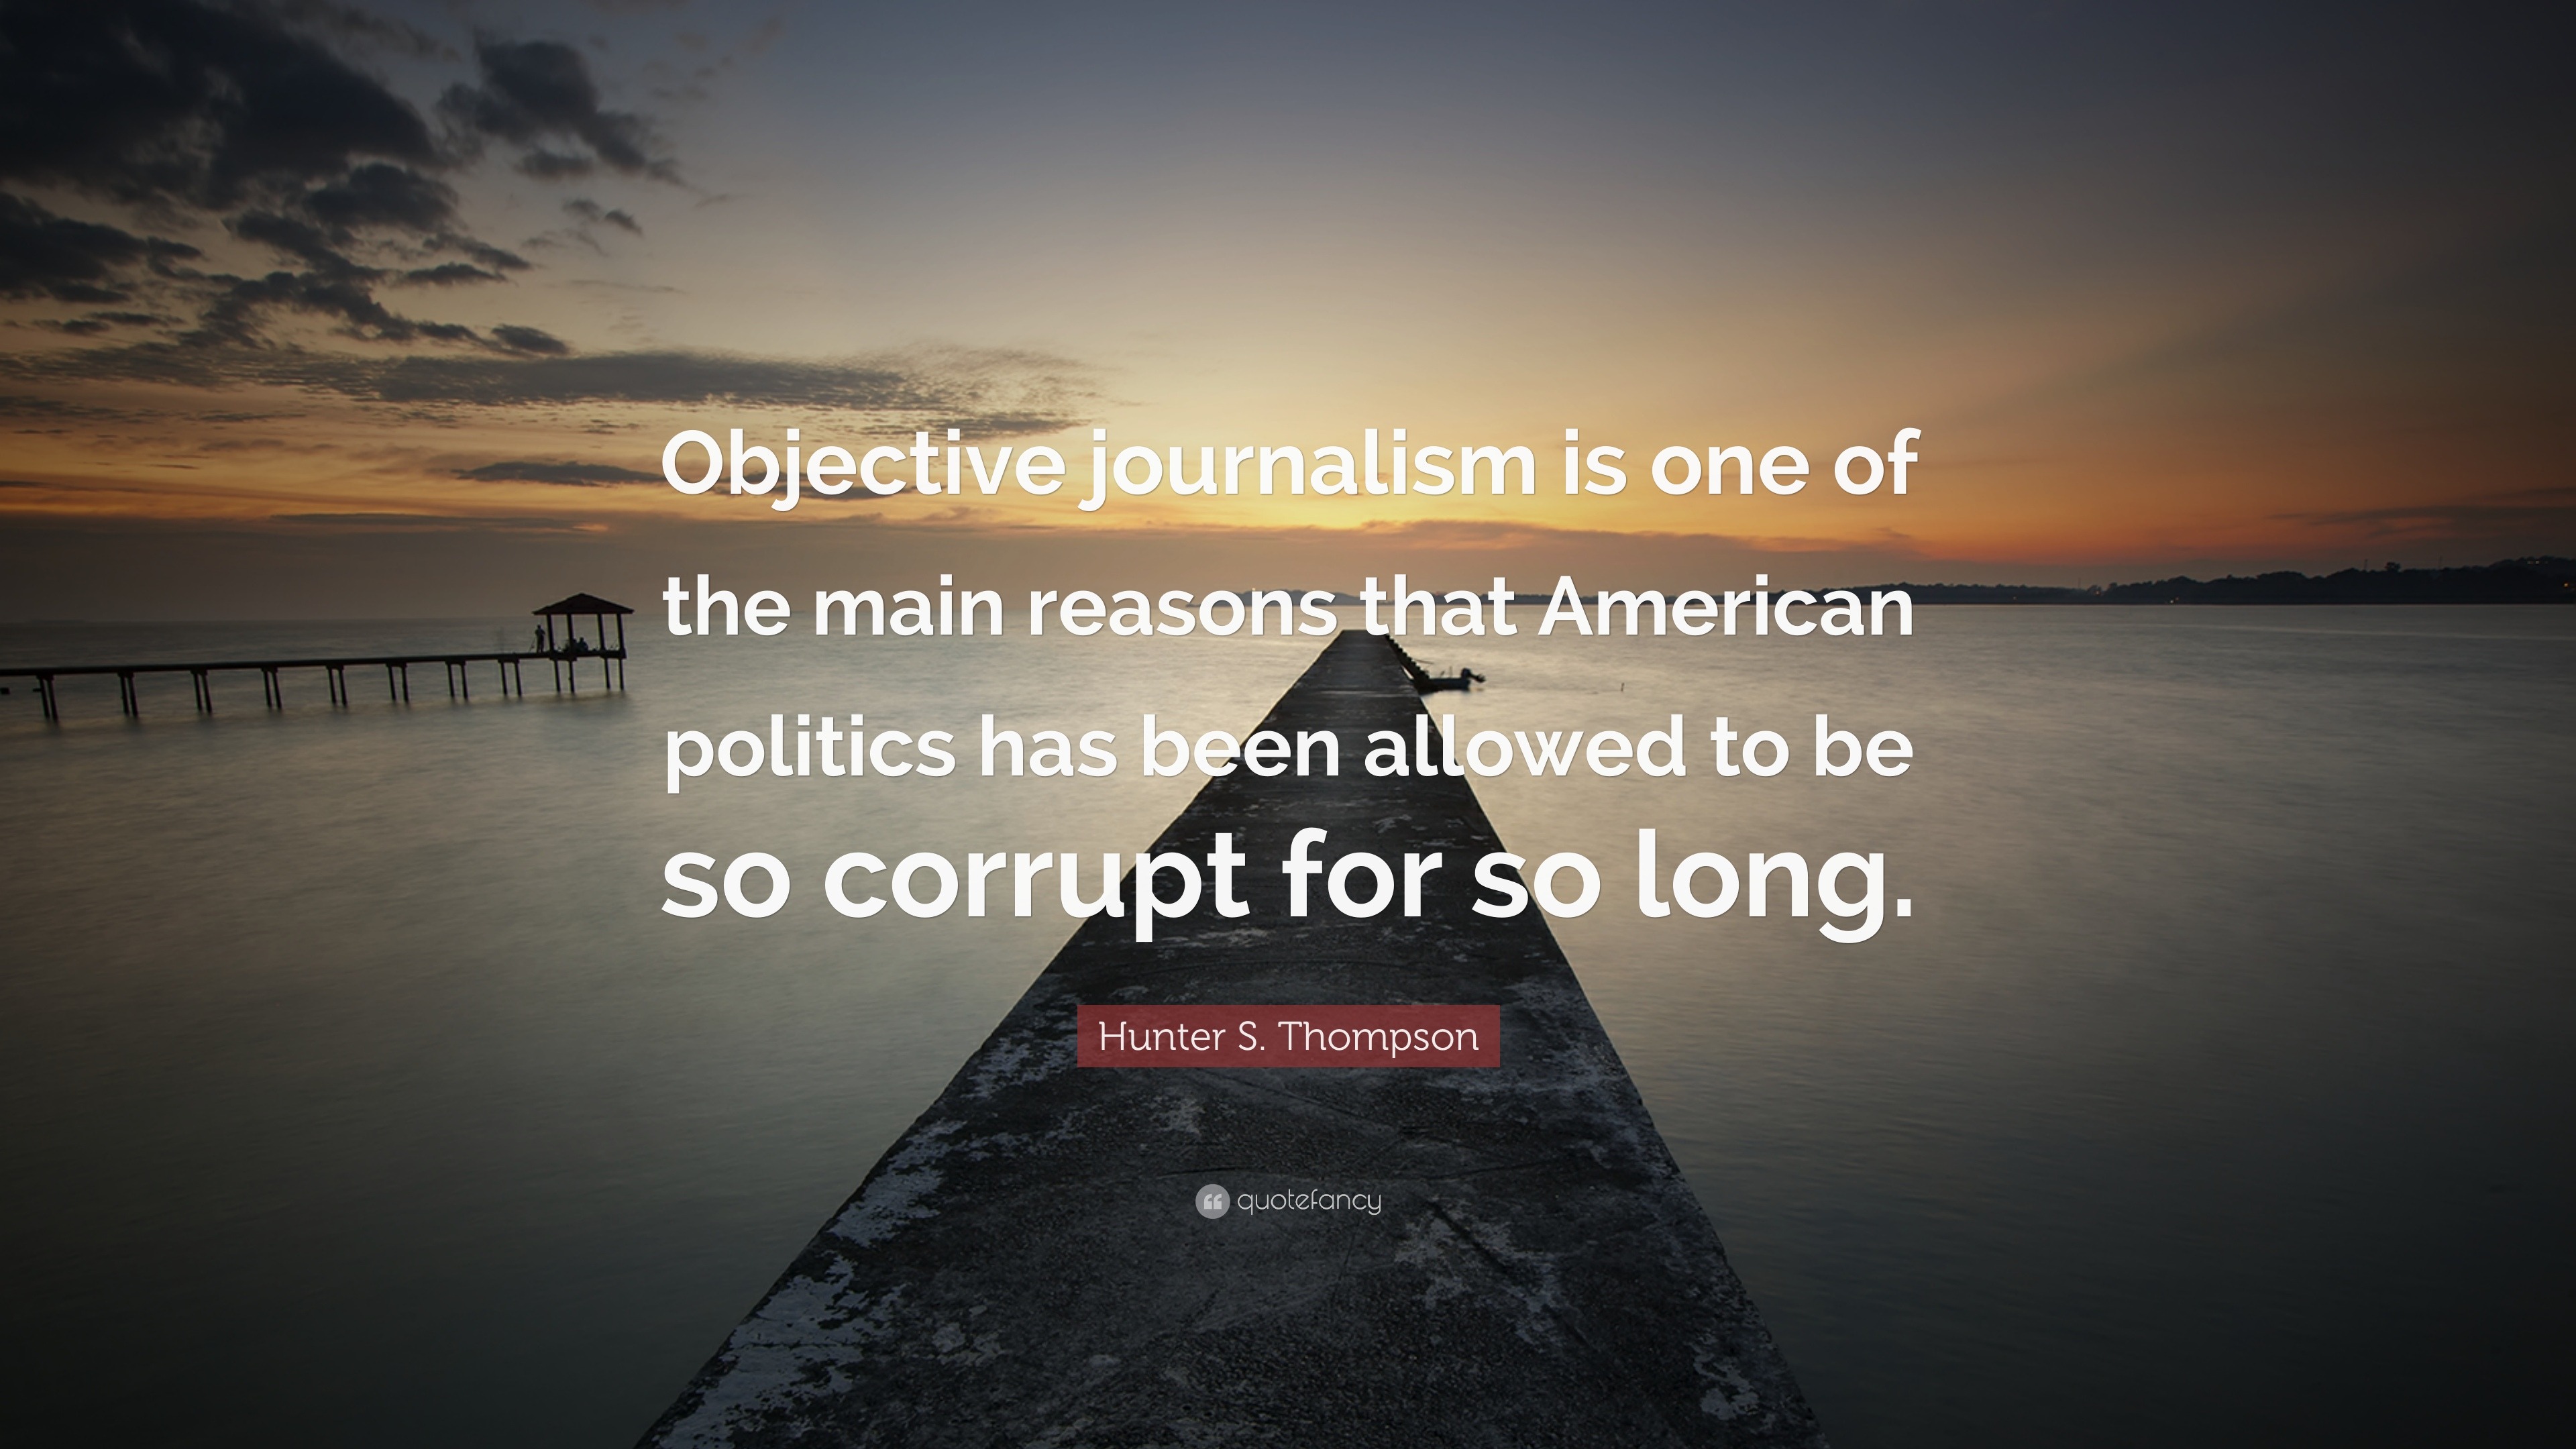 Hunter S. Thompson Quote: “Objective journalism is one of the main